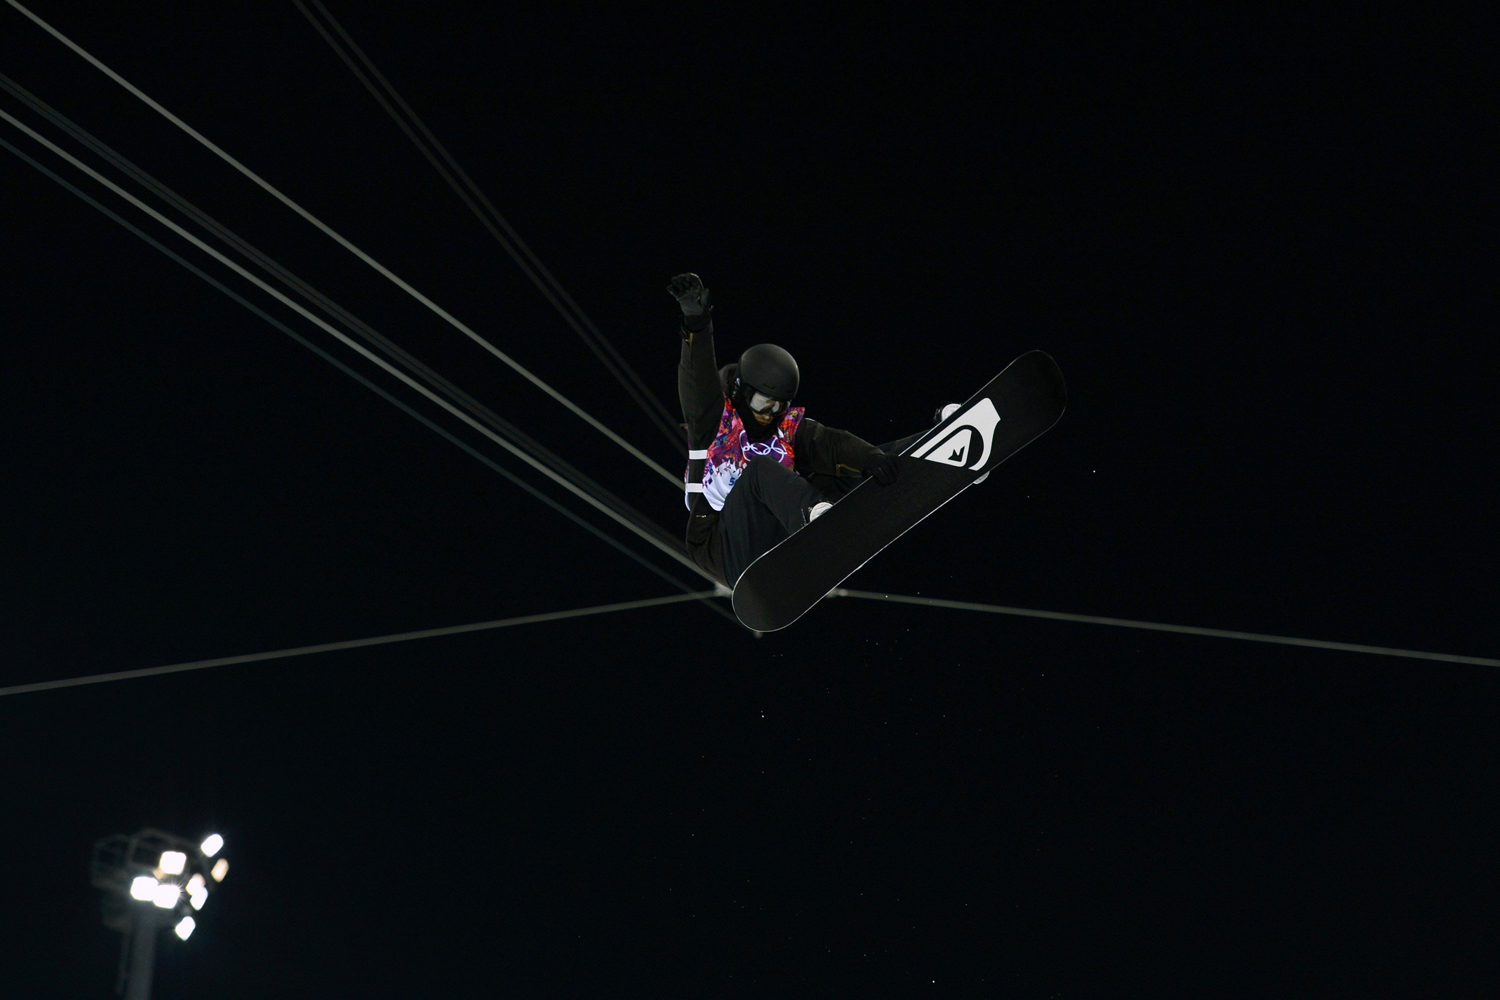 Feb. 11, 2014. Switzerland's Iouri Podladtchikov performs a jump during the men's snowboard halfpipe semi-final event at the 2014 Sochi Winter Olympic Games.